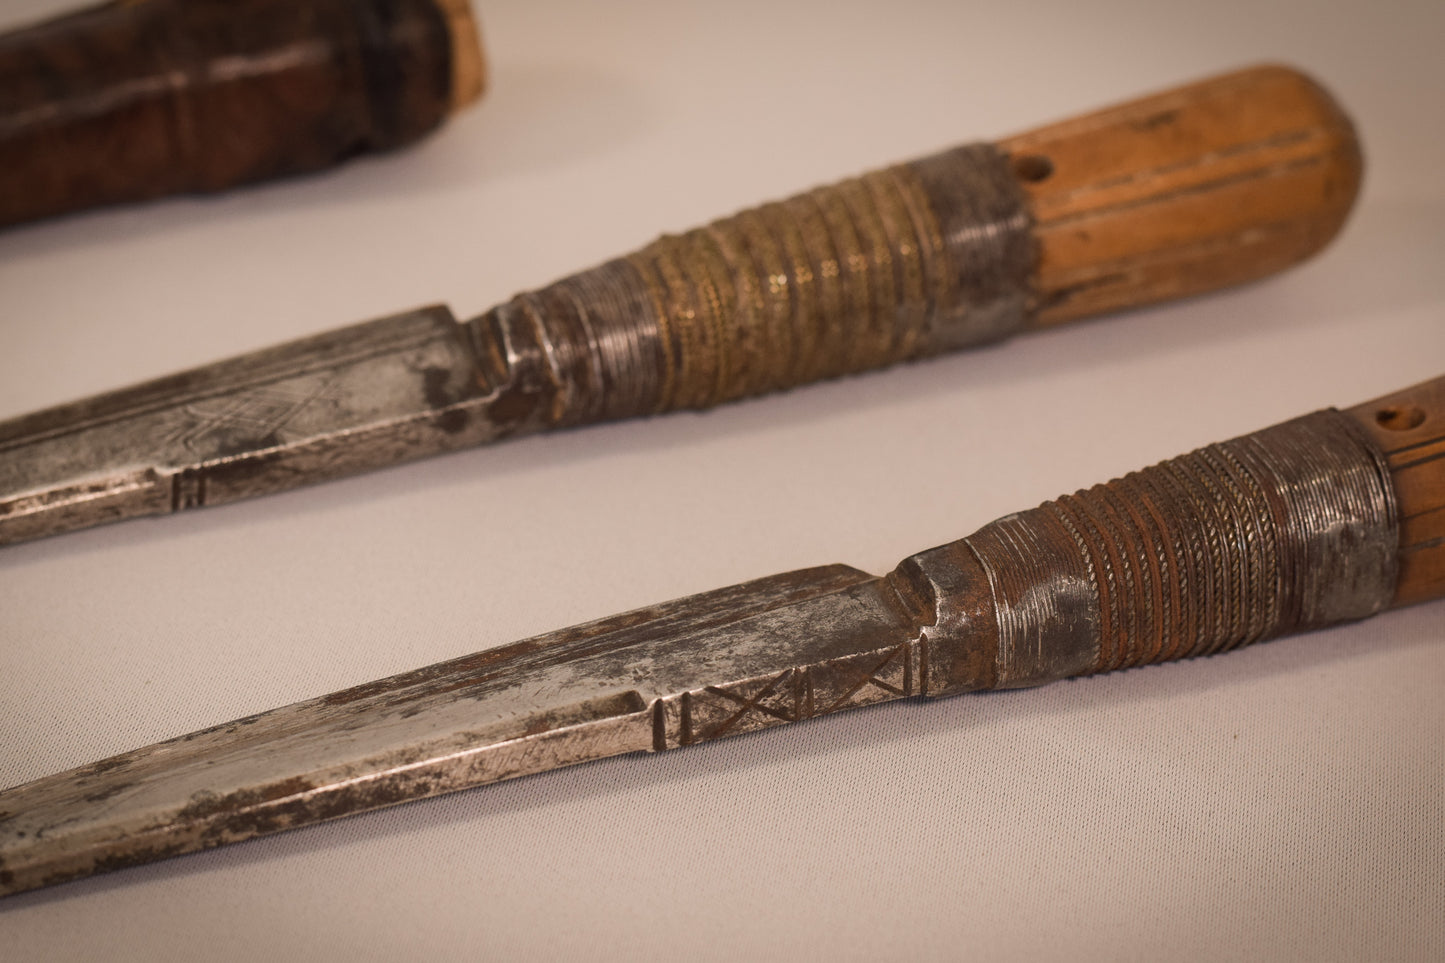 Early 17th or 18th century - Two hunting knifes or daggers one with leather sheaf